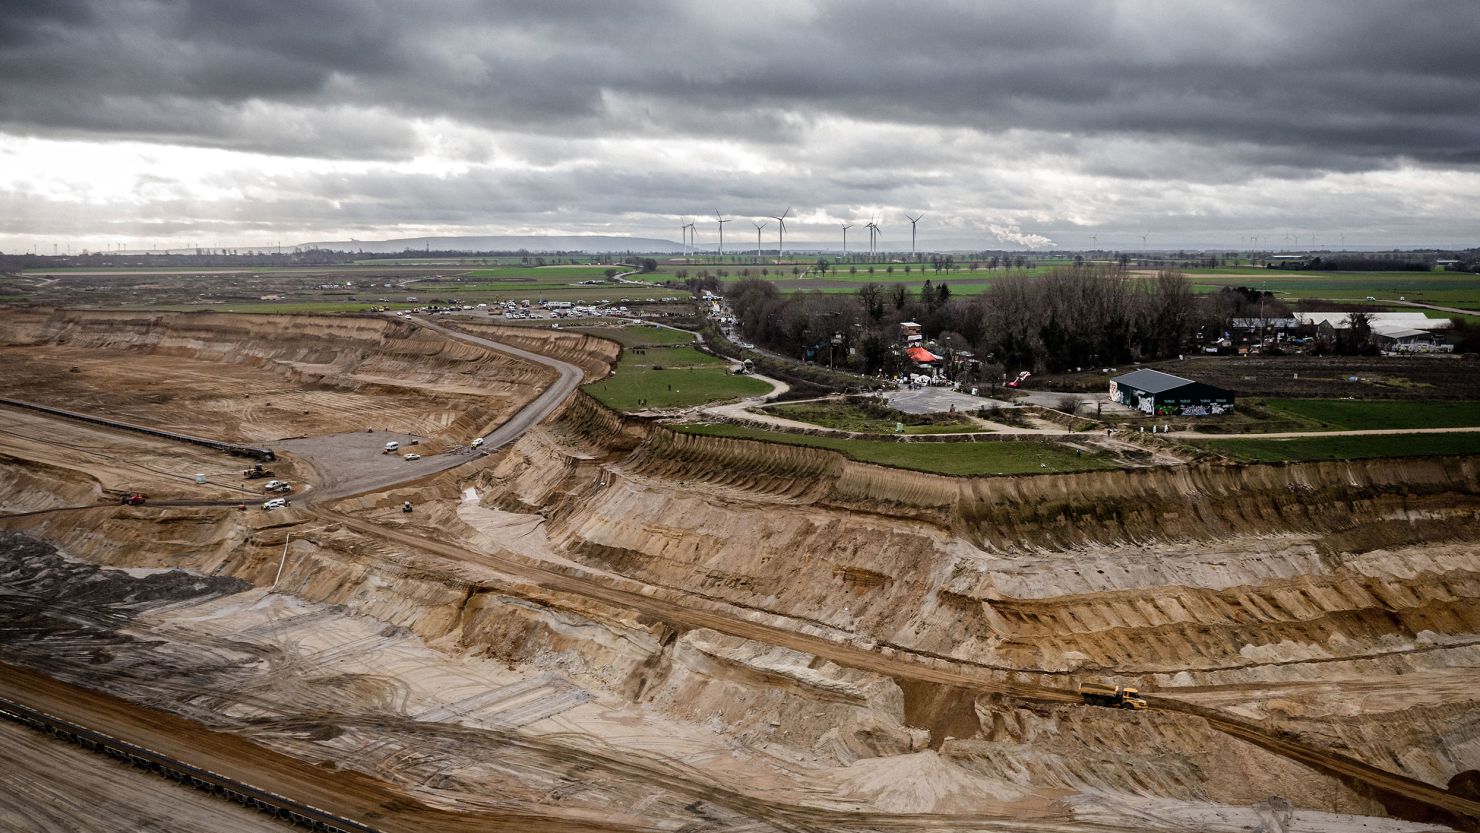 destroy this a to stop village Thousands Germany to mine. for it CNN | plans gathering coal are